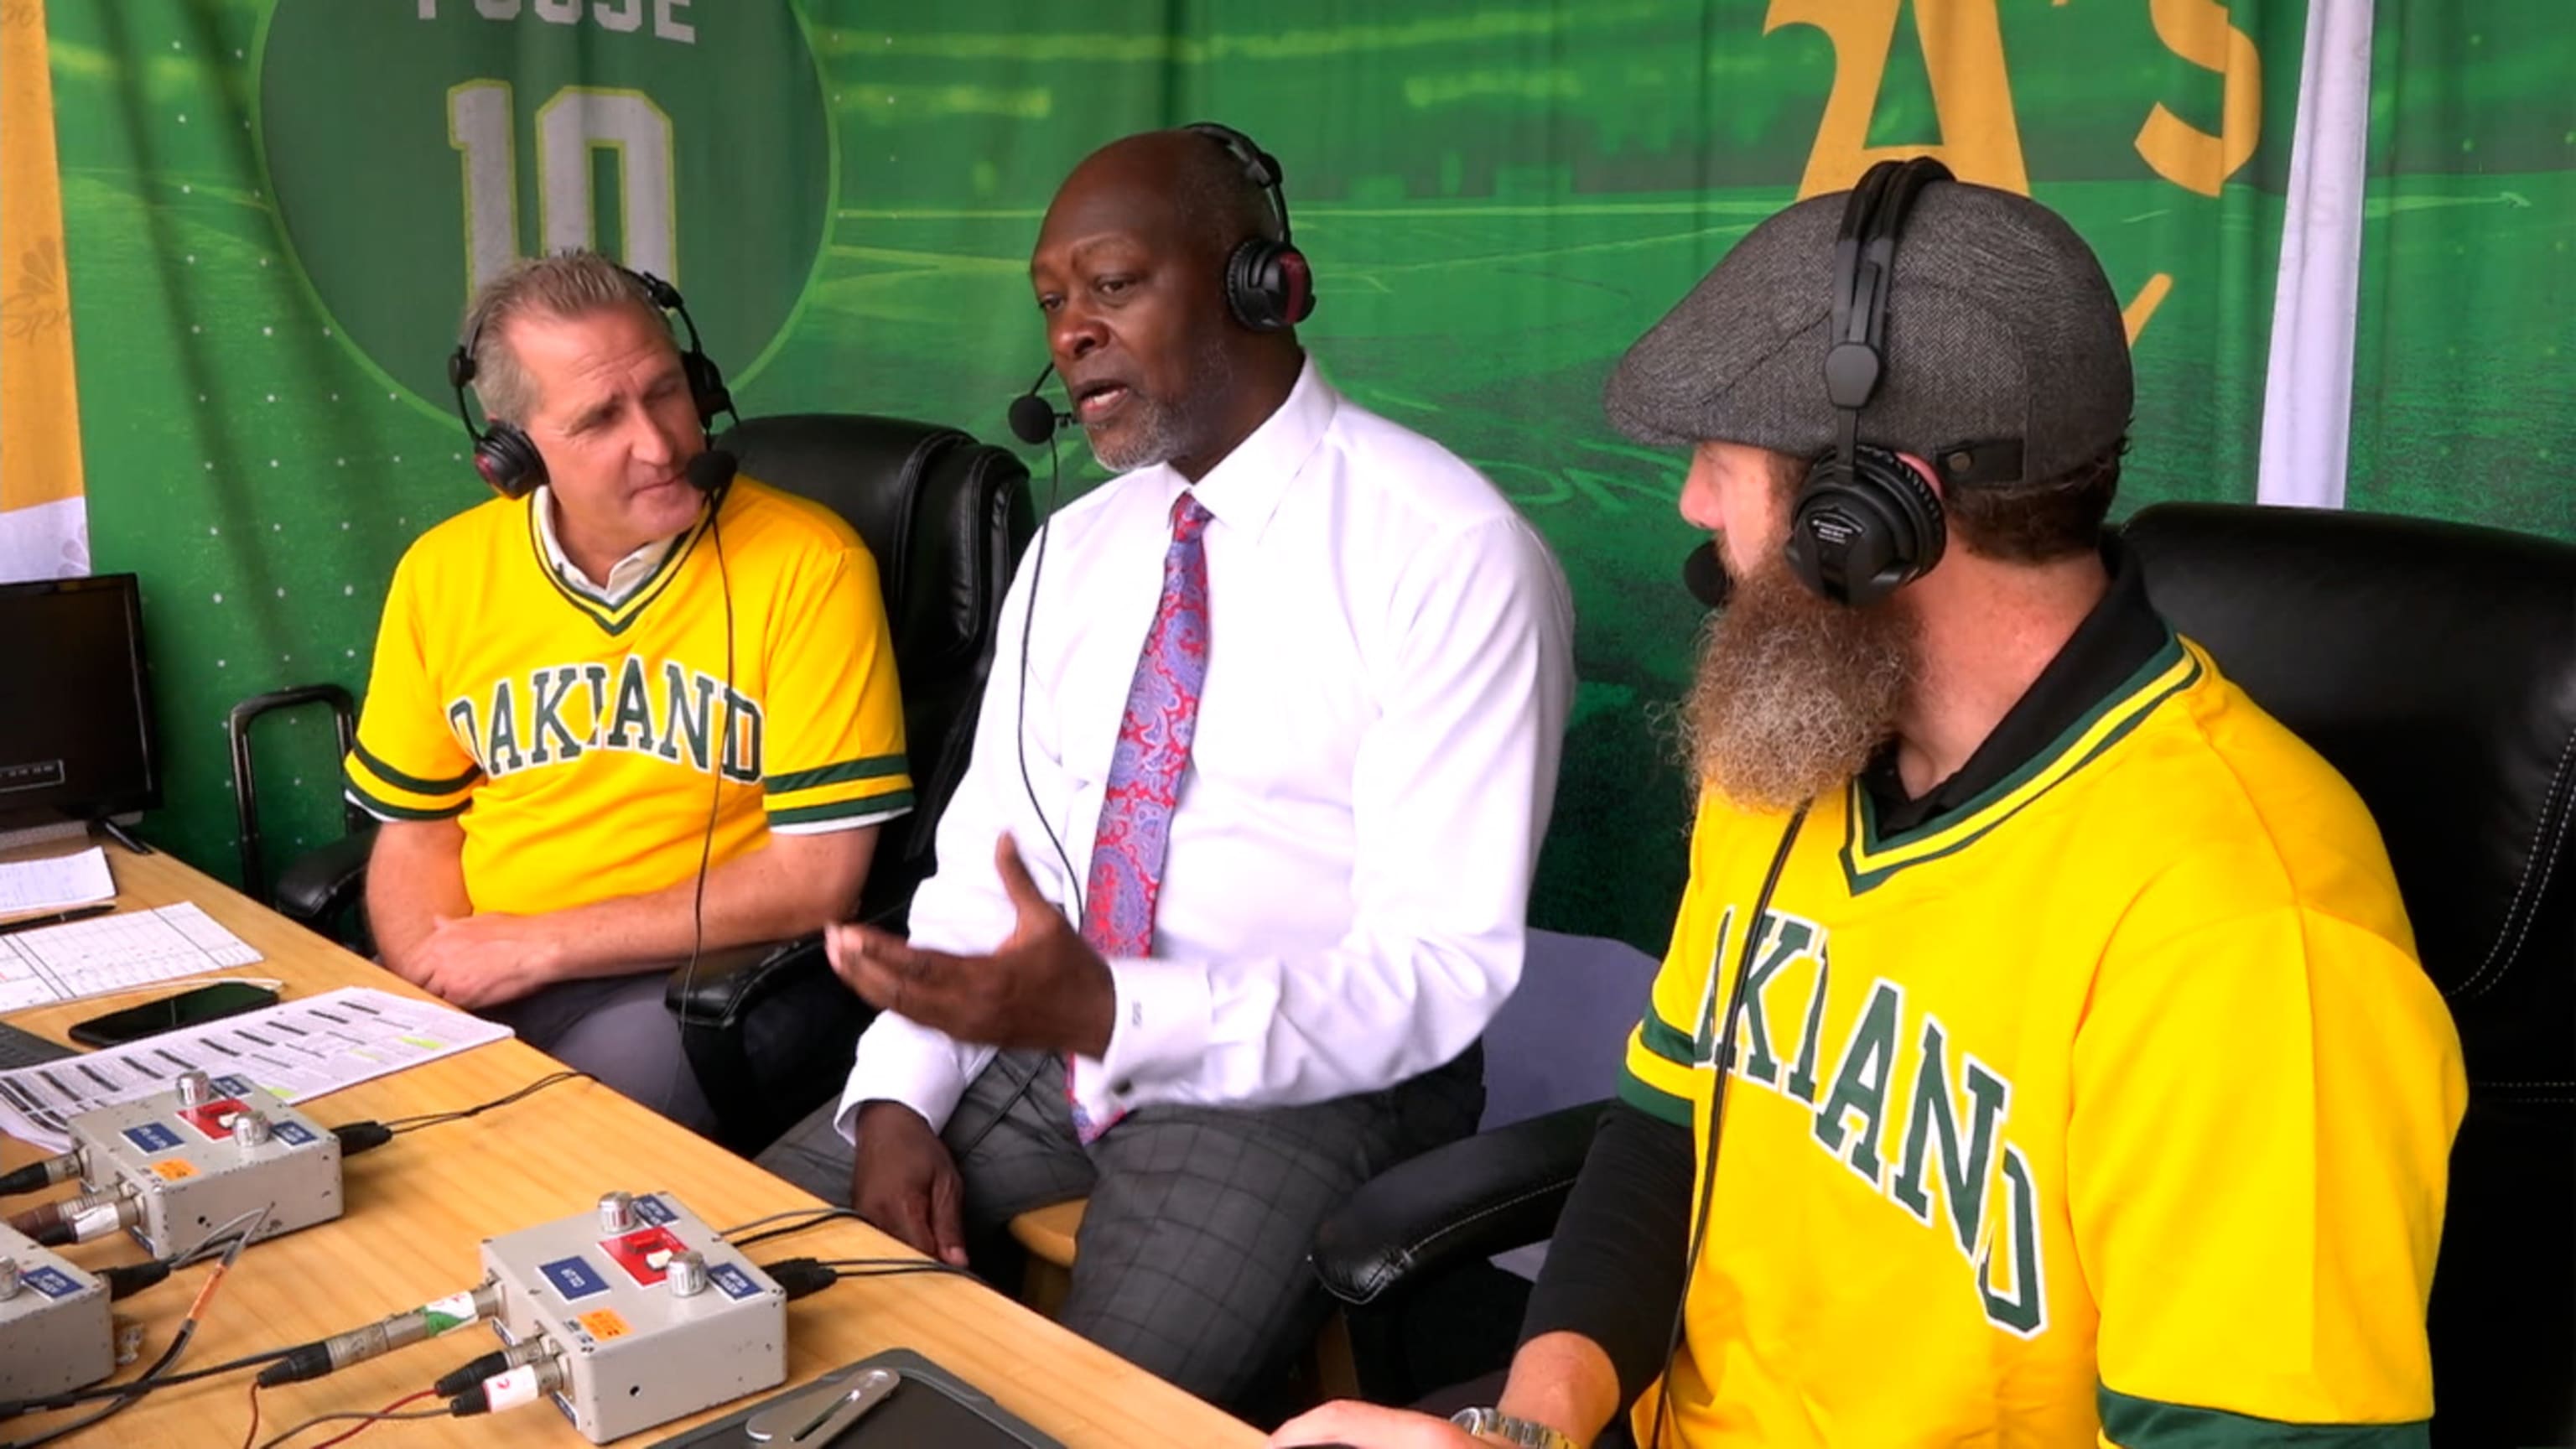 Dave Stewart still waiting for number to be retired by A's